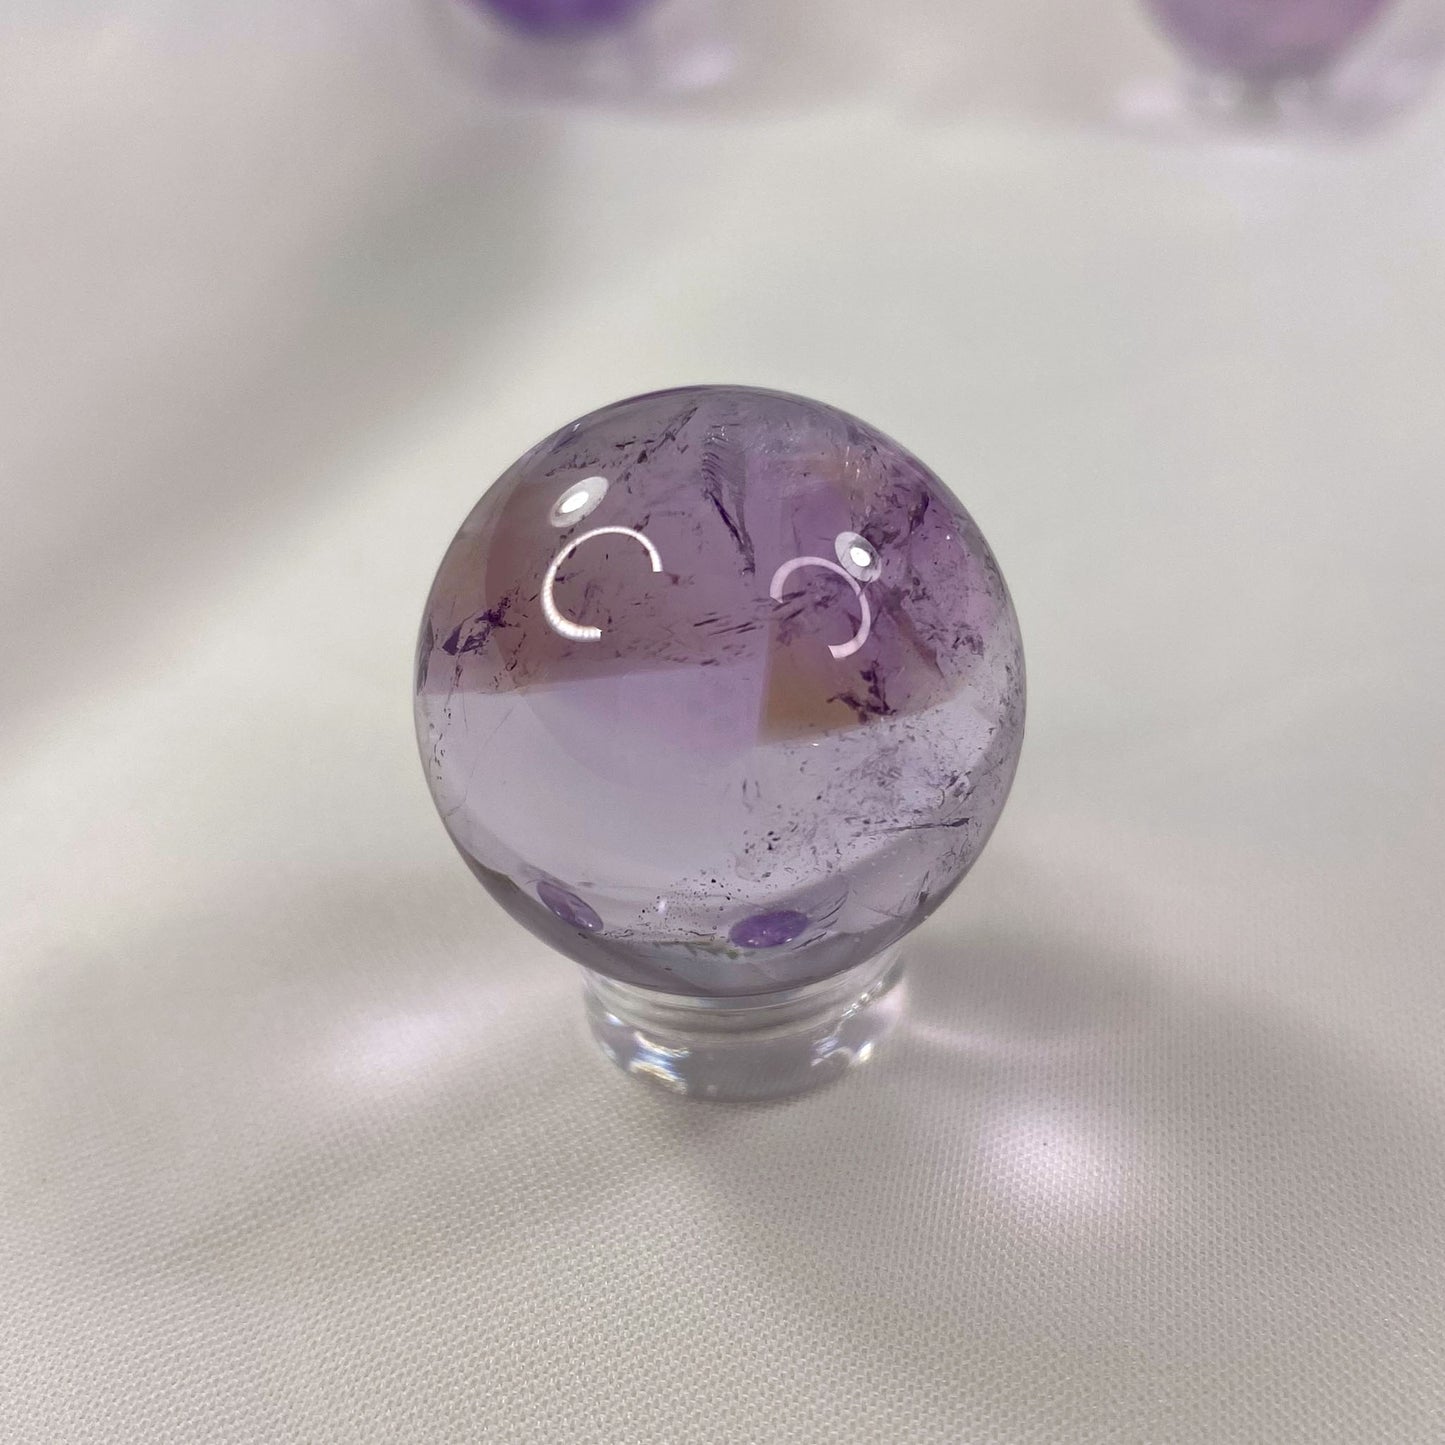 Ametrine Sphere with Trapiche-like Zoning